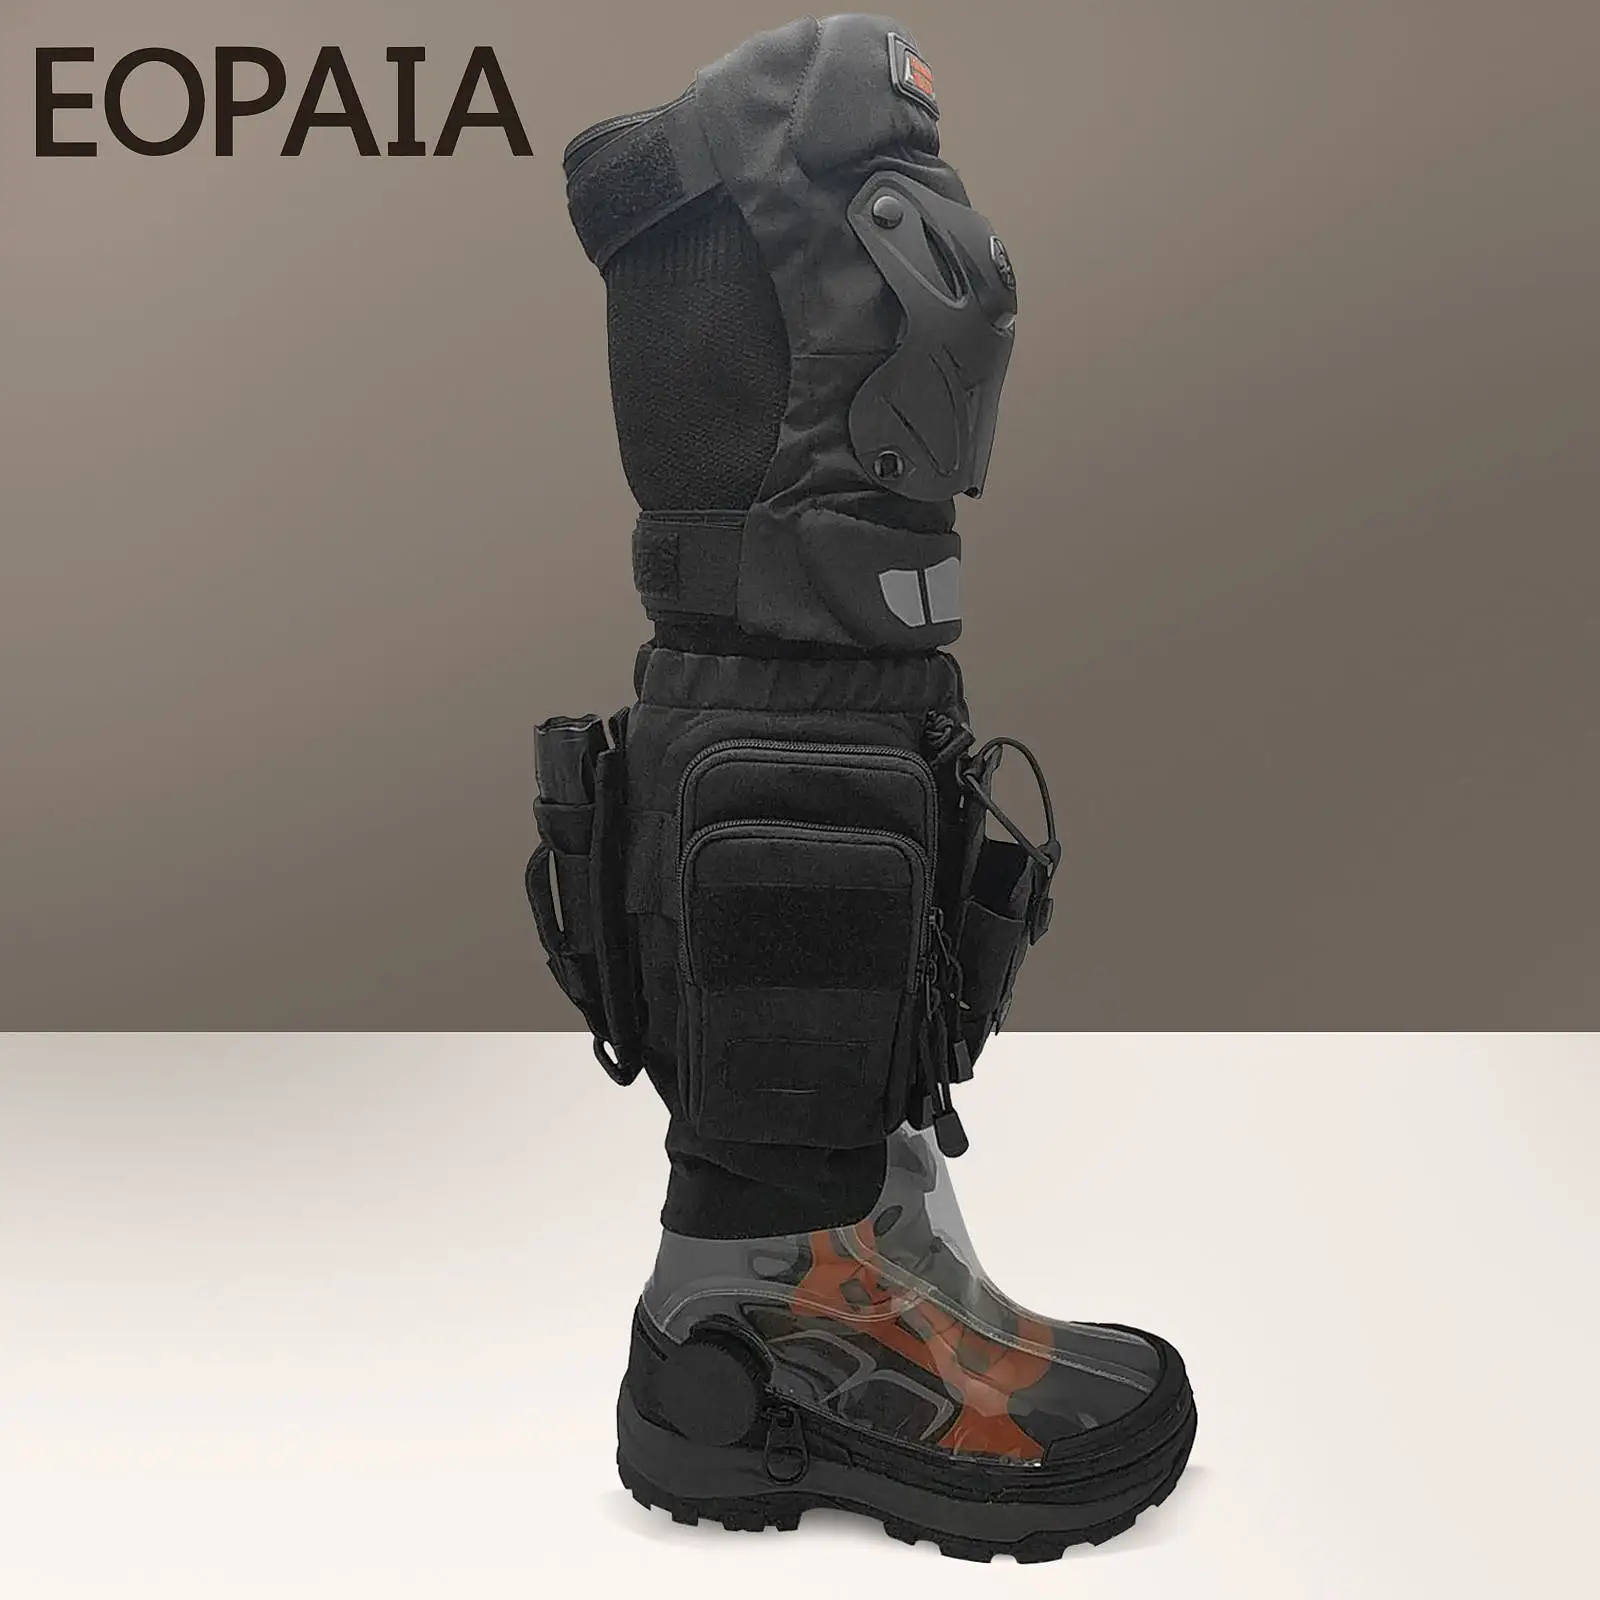 Special rescue equipment, detachable, waterproof, protective shoes, many choices available suppliers in China